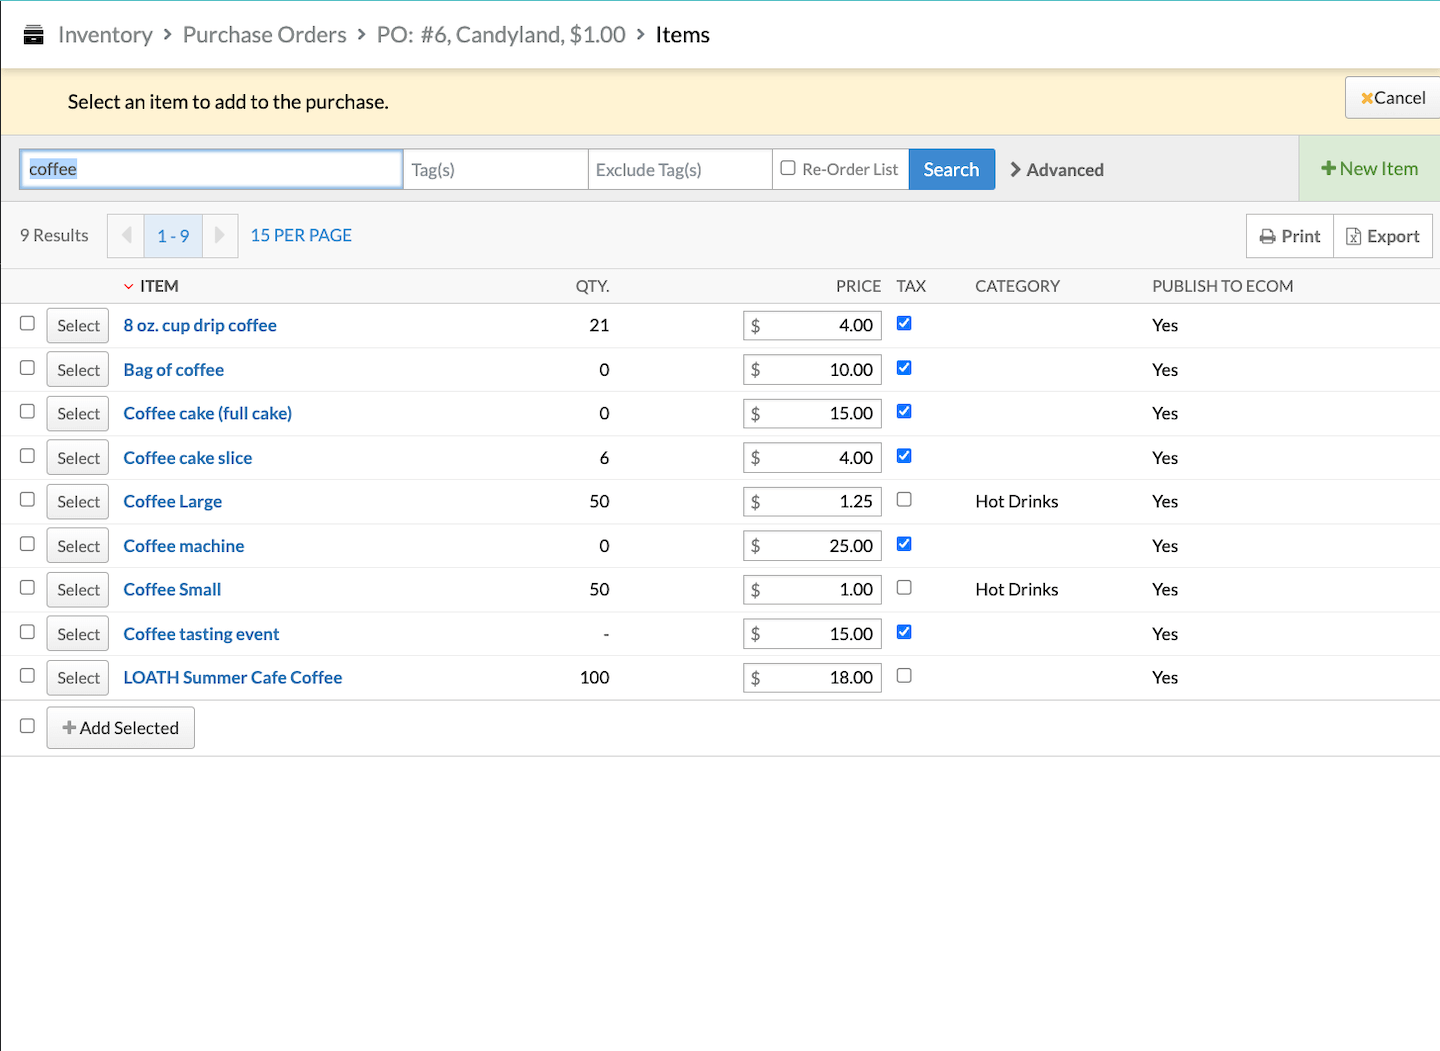 Page showing multiple item options based on the entered keyword.